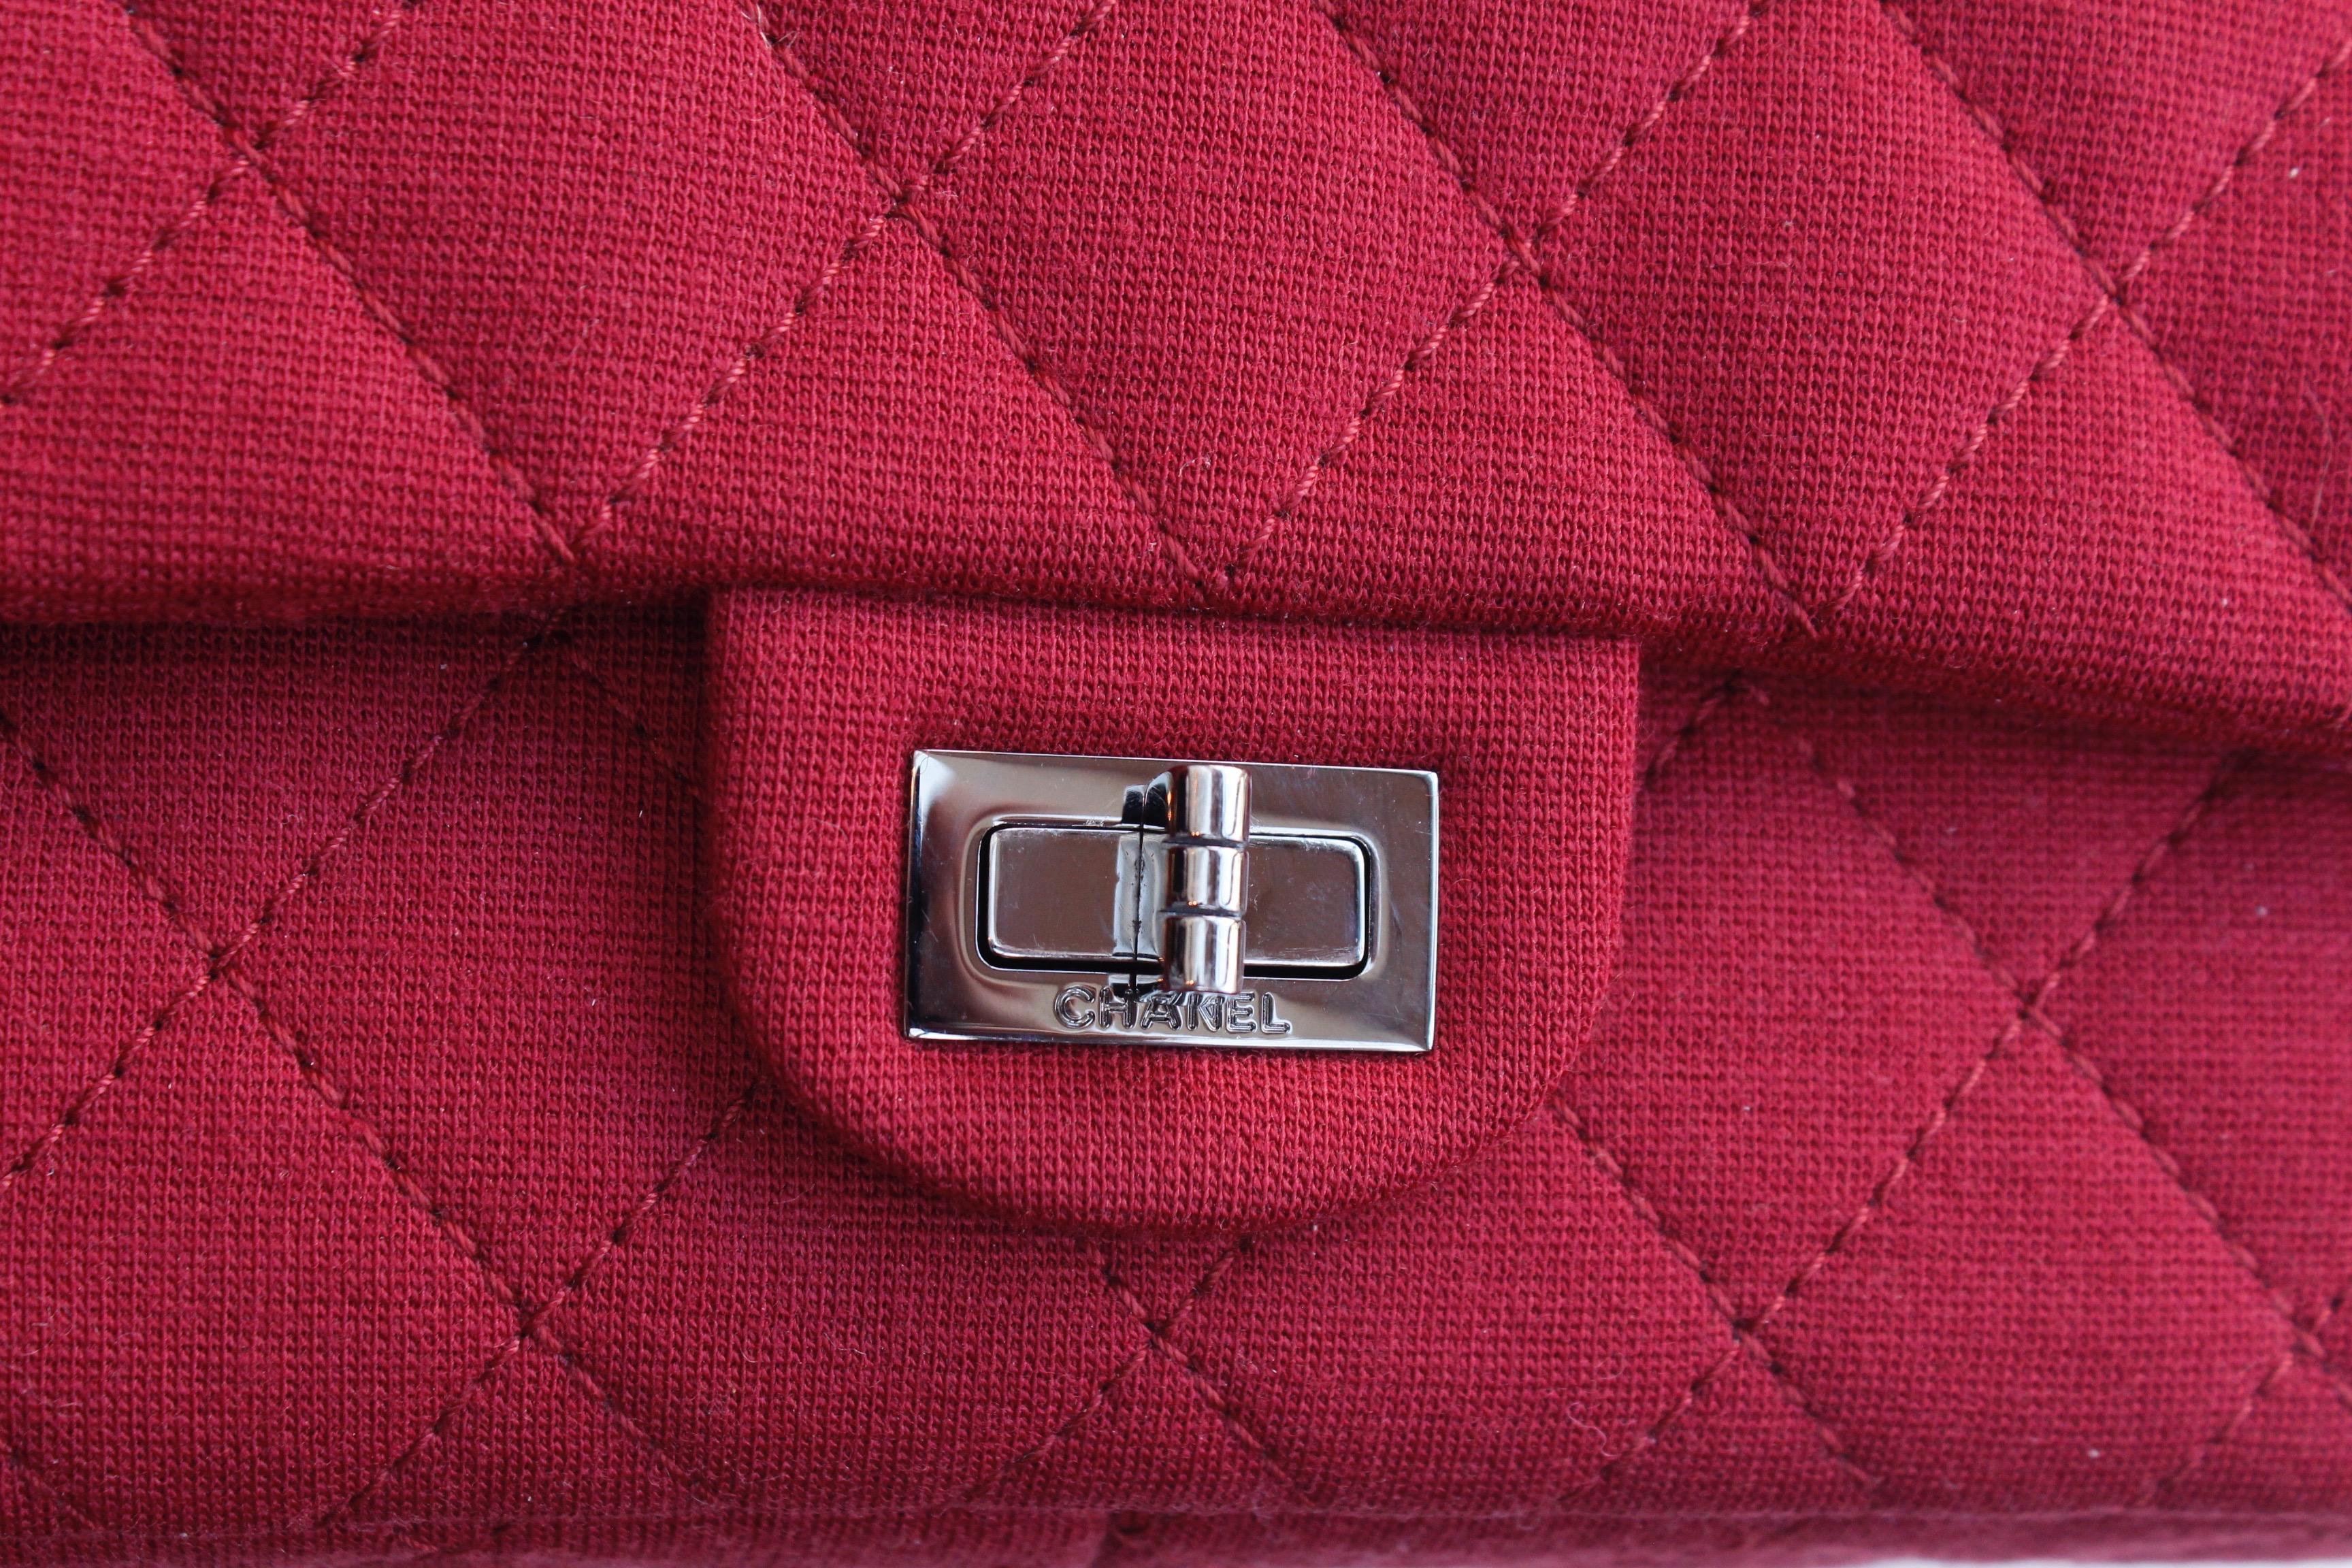 Chanel quilted red jersey 2.55 bag with silver plated chain handle For Sale 6